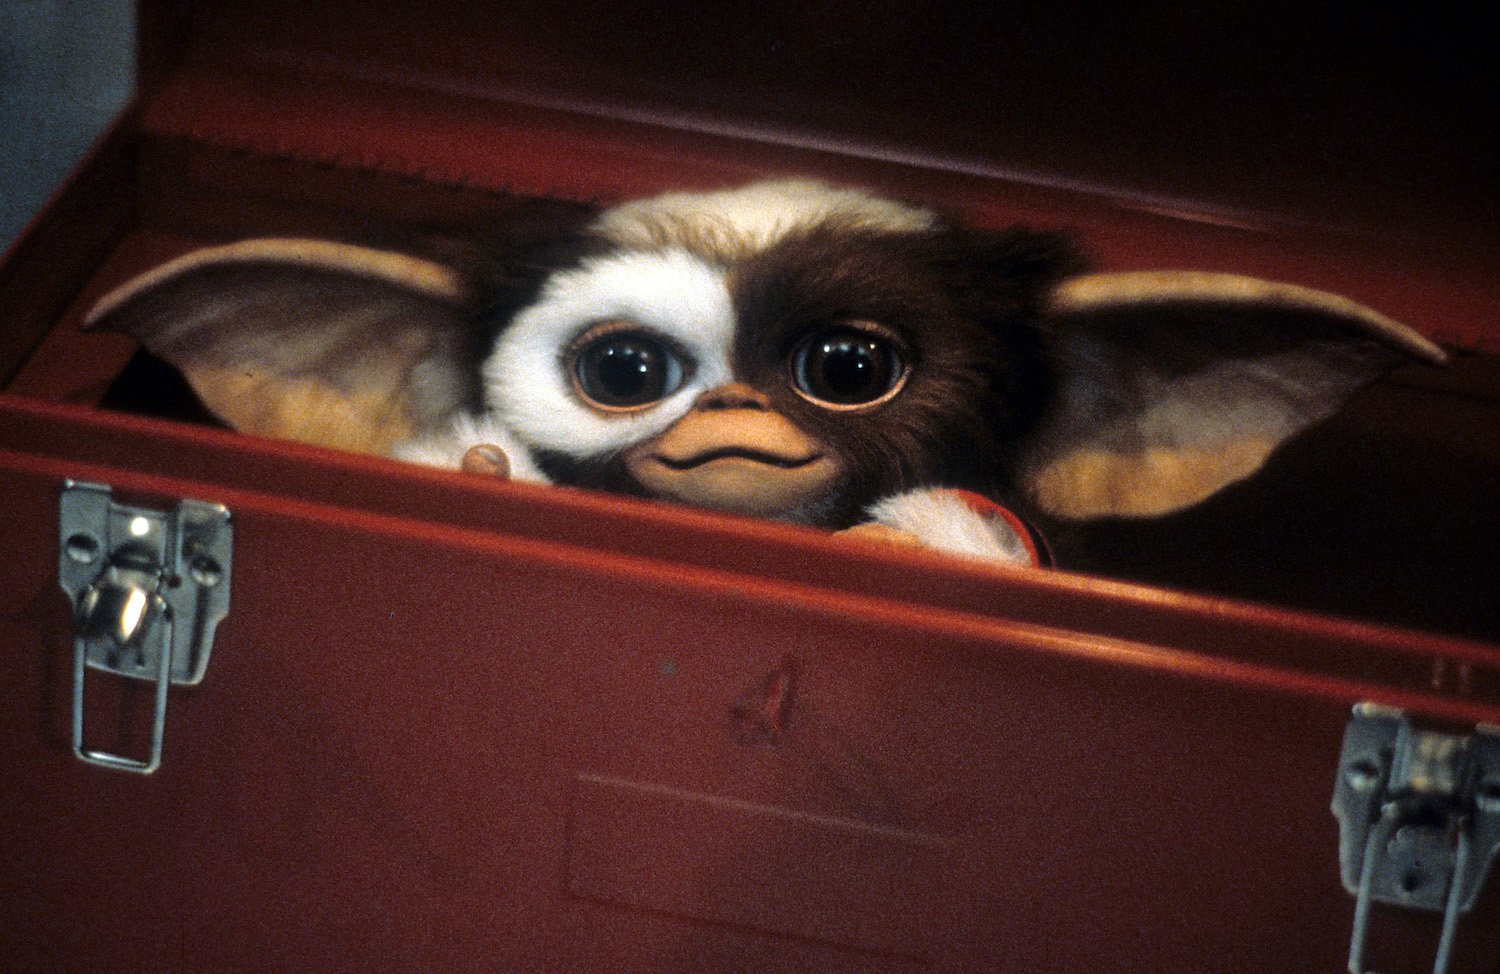 Gizmo peeks out of a toolbox in this photo from 'Gremlins,' the 1984 Christmas horror movie.